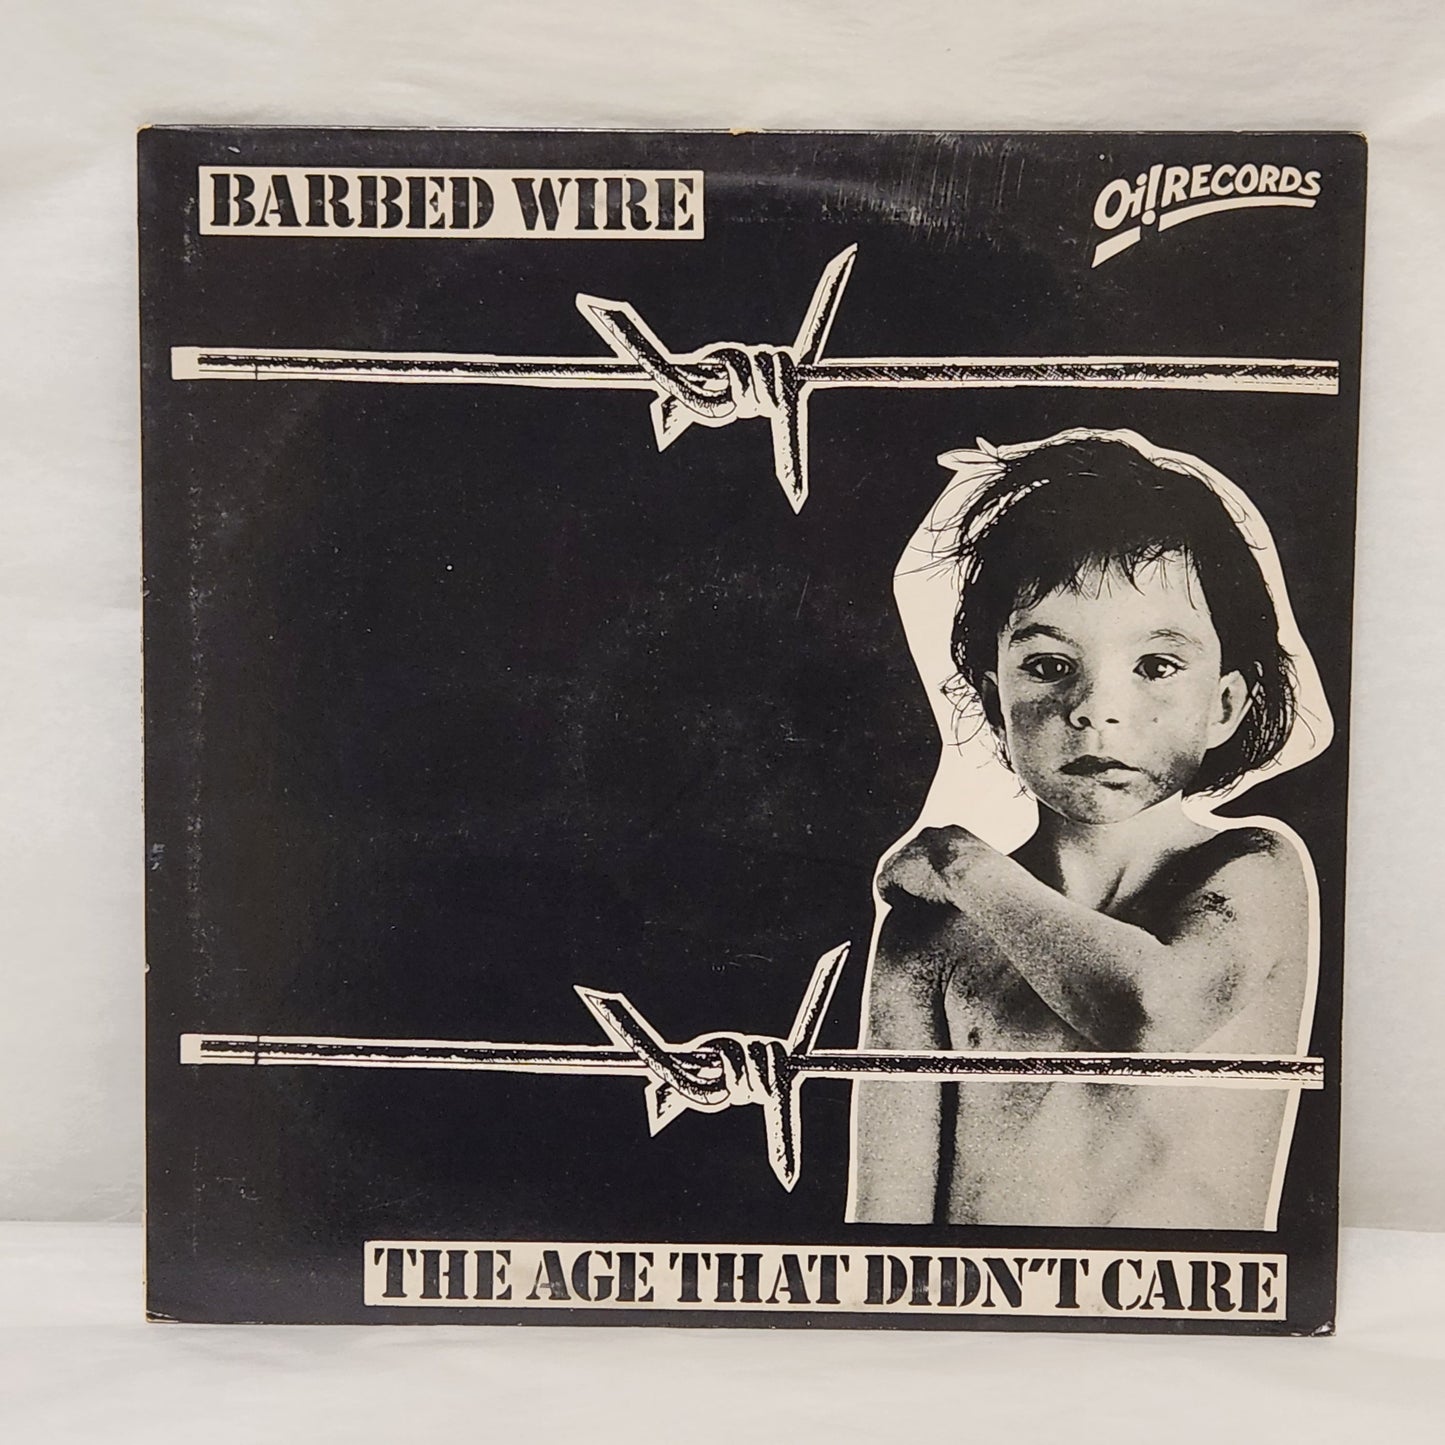 Barbed Wire "The Age That Didn't Care" 1986 Punk Oi Record Album (UK Pressing)